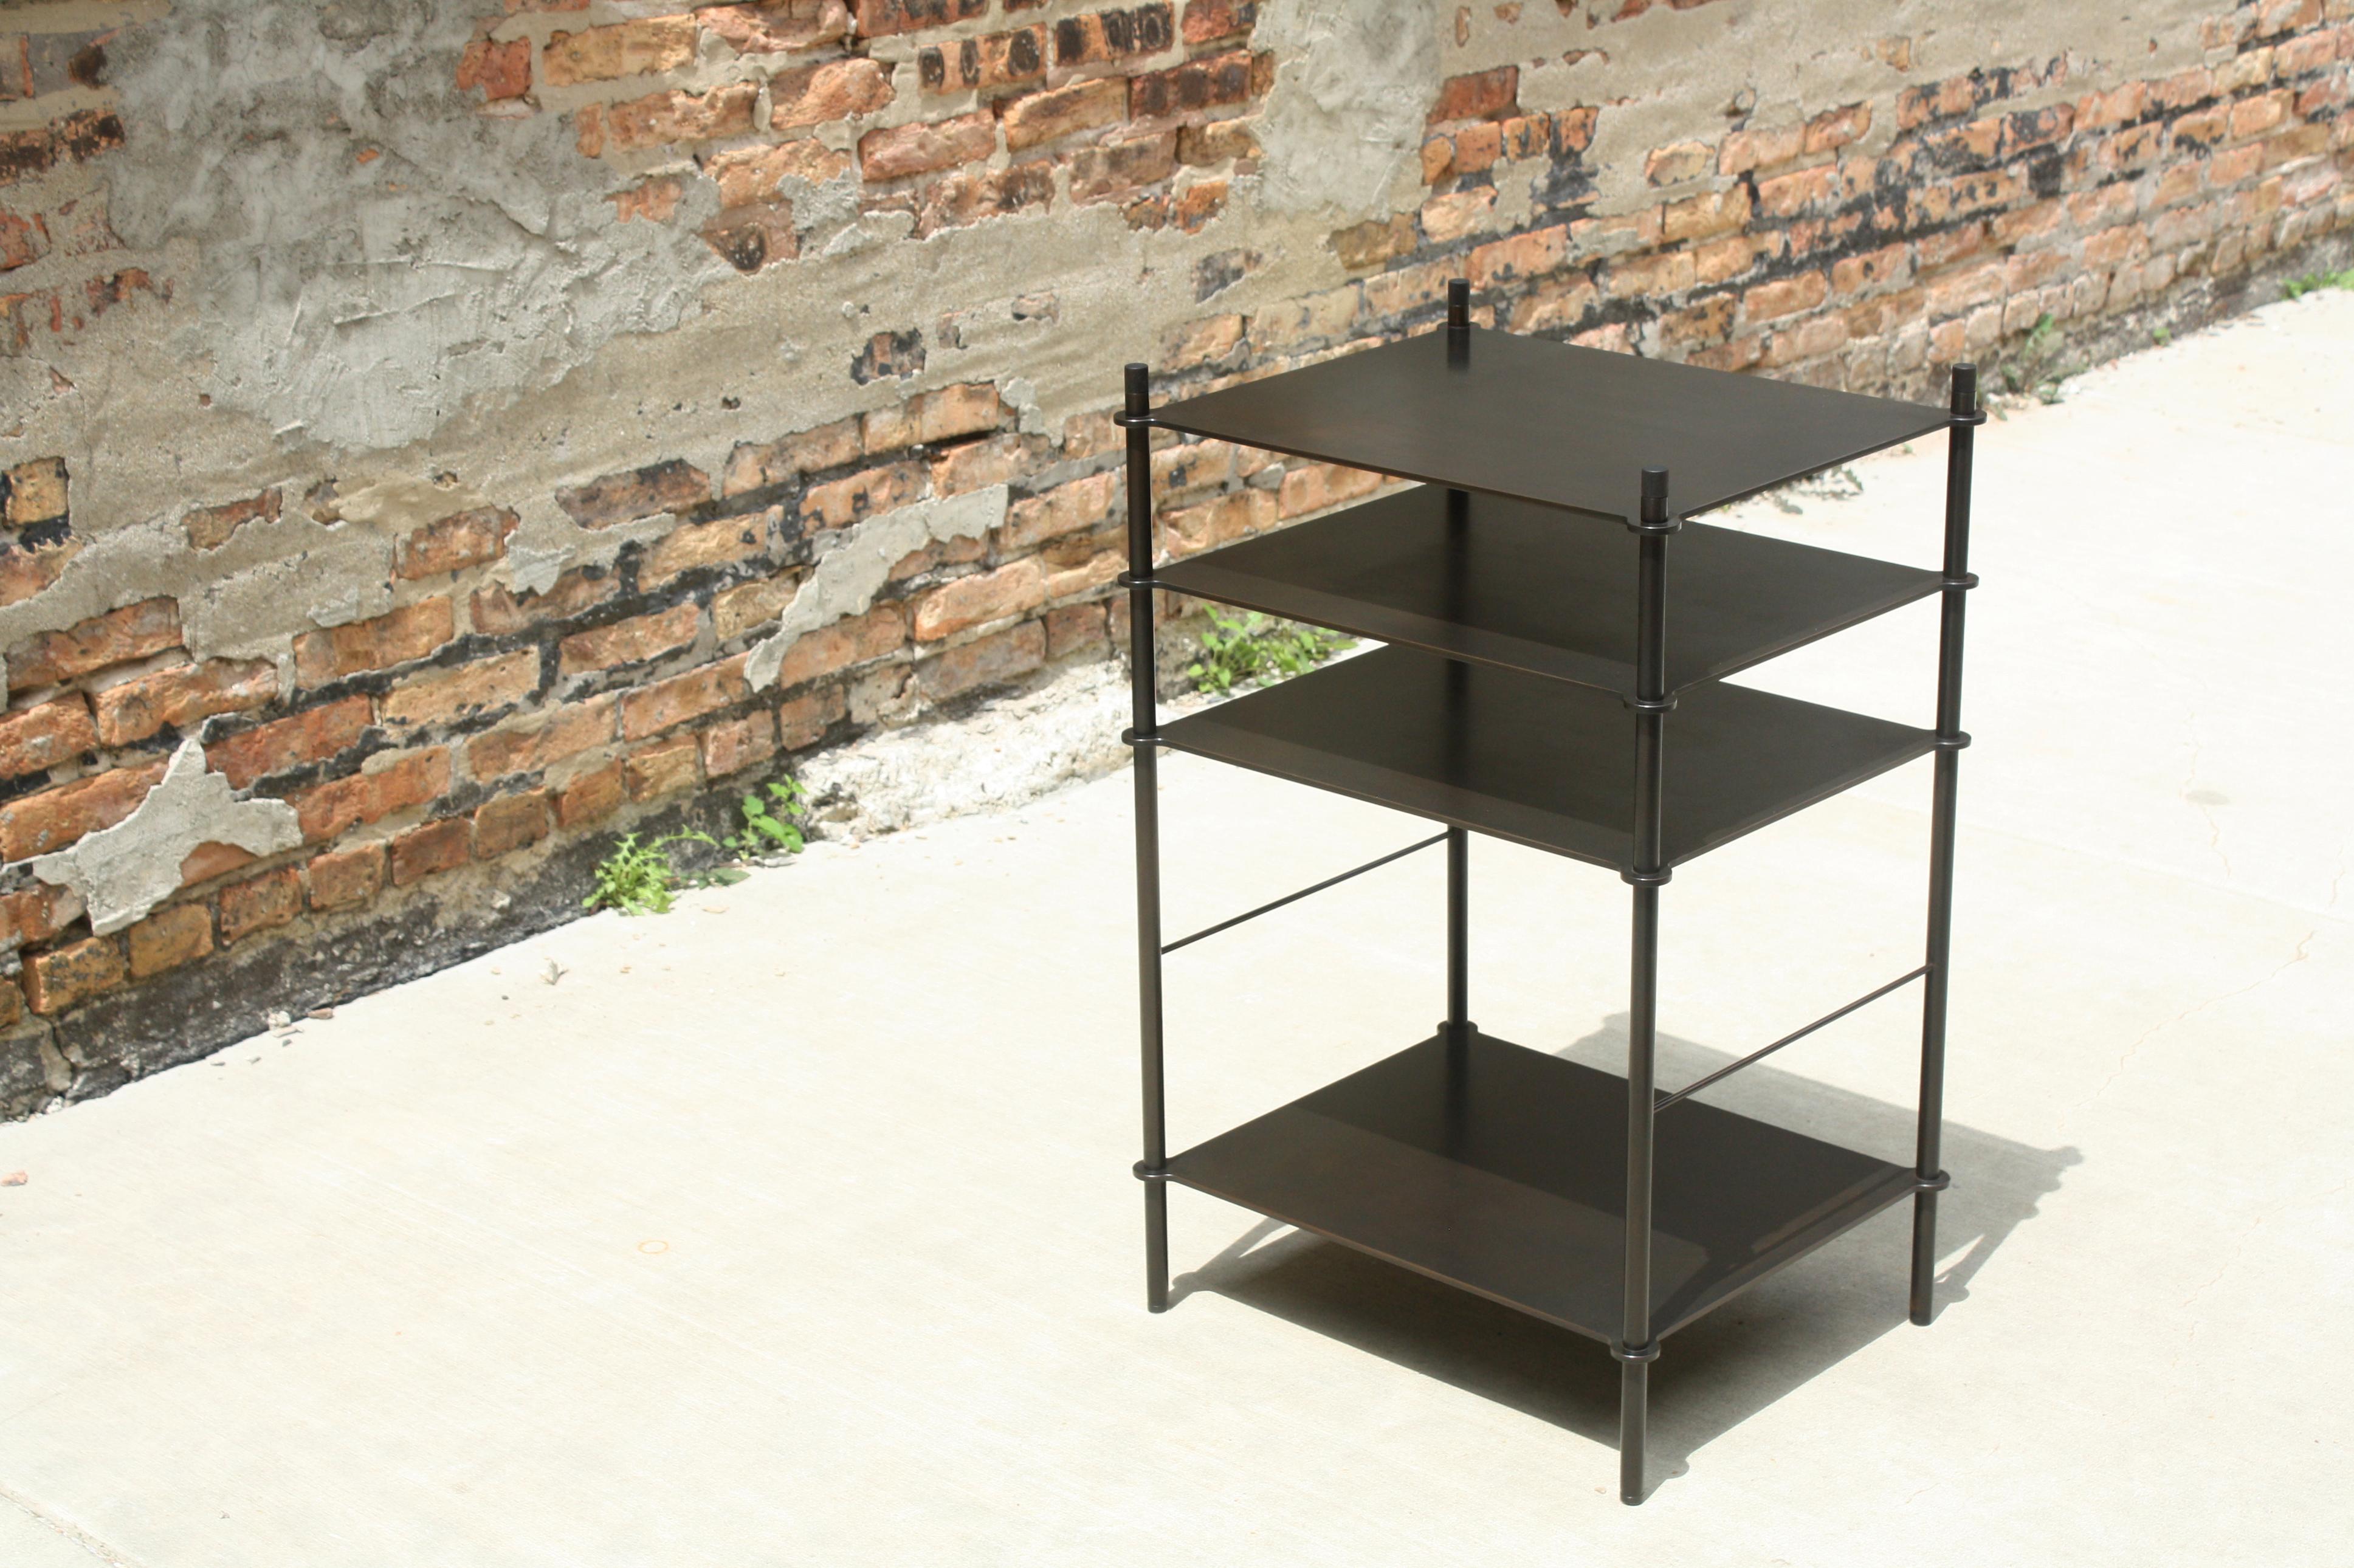 Tiered surfaces are precision welded to leveling legs creating an open shelving system that can be customized for any space or use. Shown in acid blackened steel with hand-turned and ebonized walnut finials, the piece shown was designed to hold a